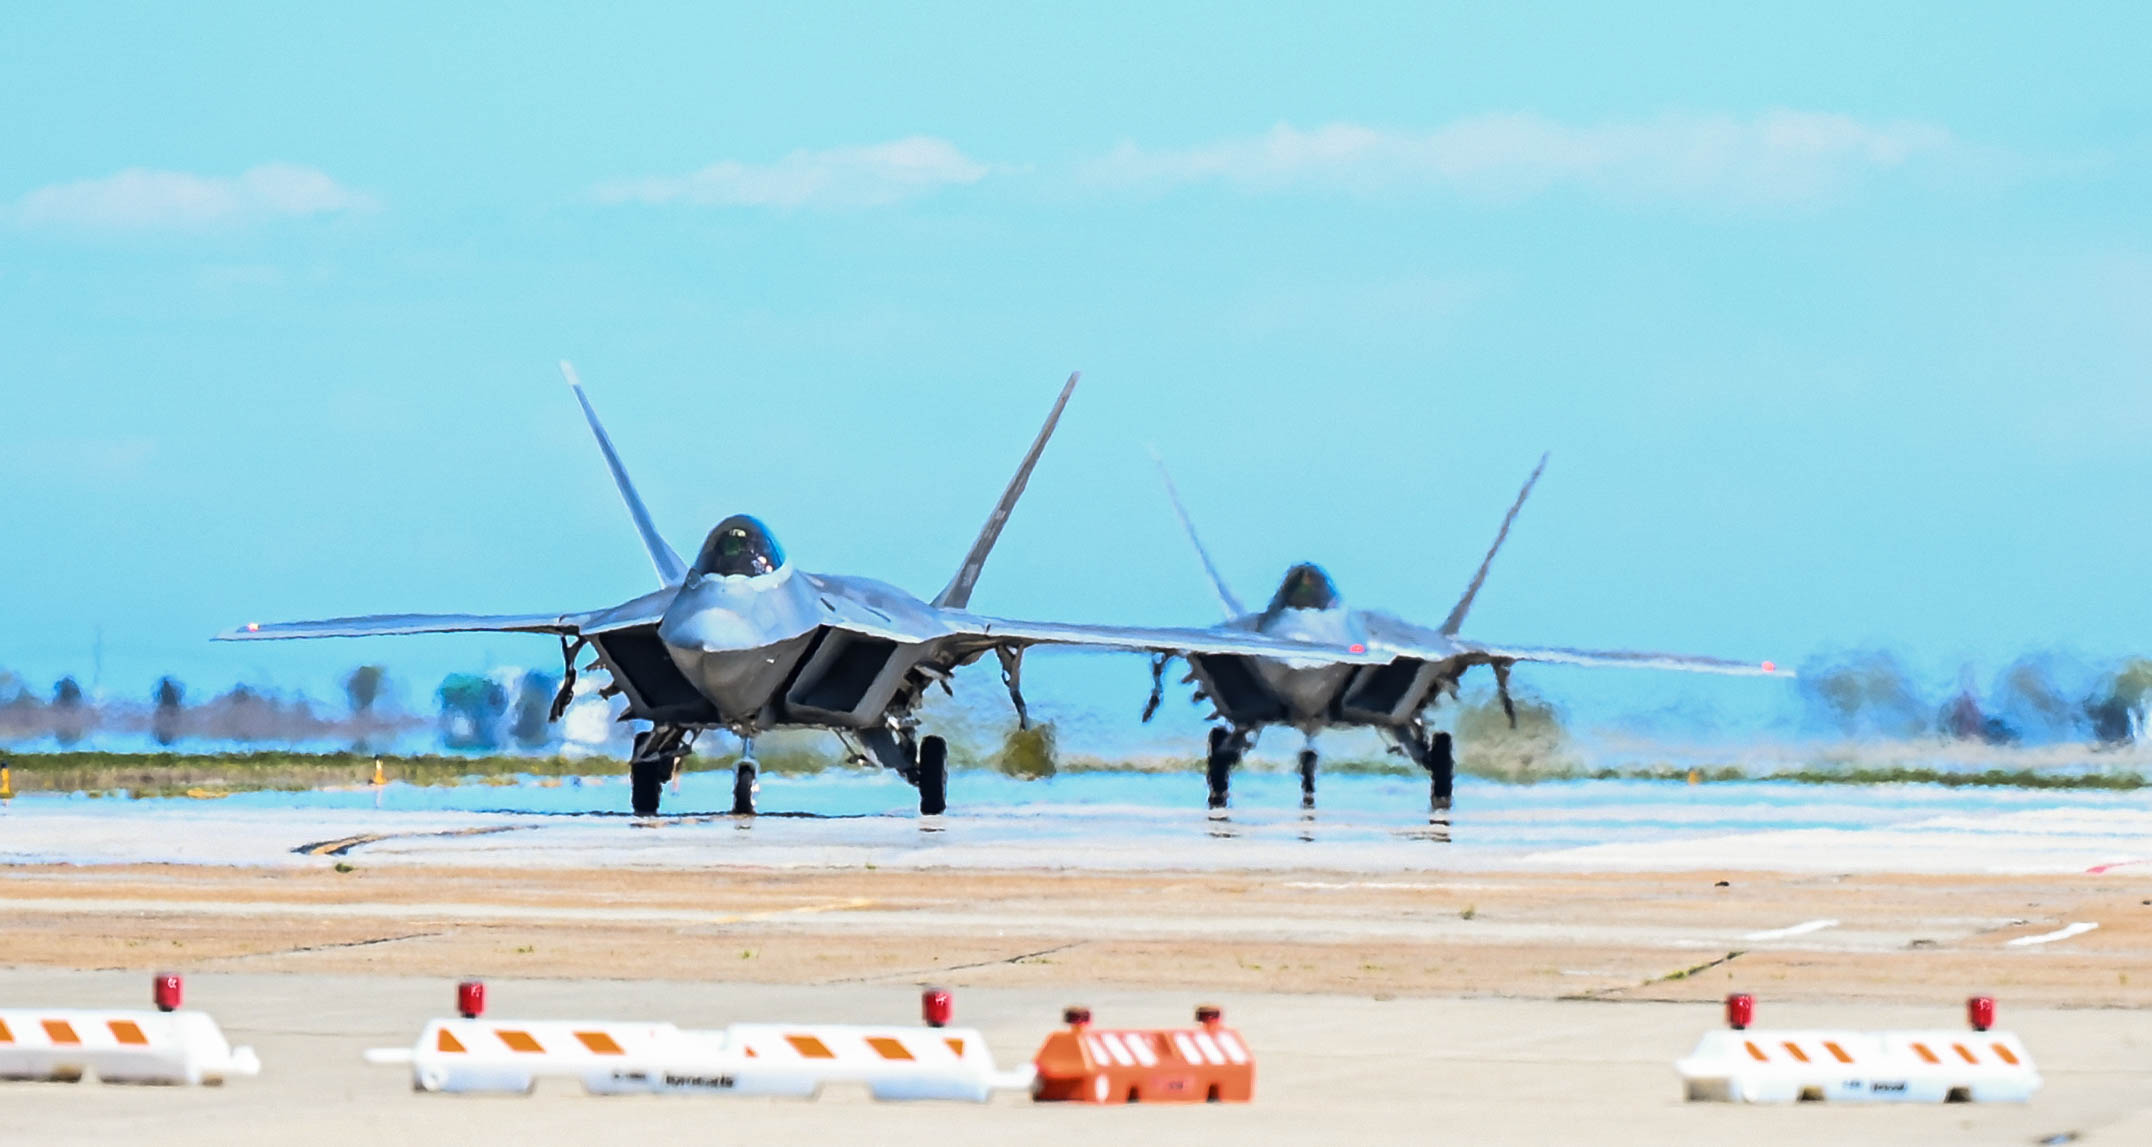 The first two F-22 Raptors, part of the incoming Formal Training Unit aircraft fleet, touch down at Joint Base Langley-Eustis, Virginia, Mar. 29, 2023. JBLE has been working hard over the last four years to prepare for the bed down of 30 additional F-22 Raptors and the establishment of the FTU. (U.S. Air Force photo by Airman 1st Class Mikaela Smith)